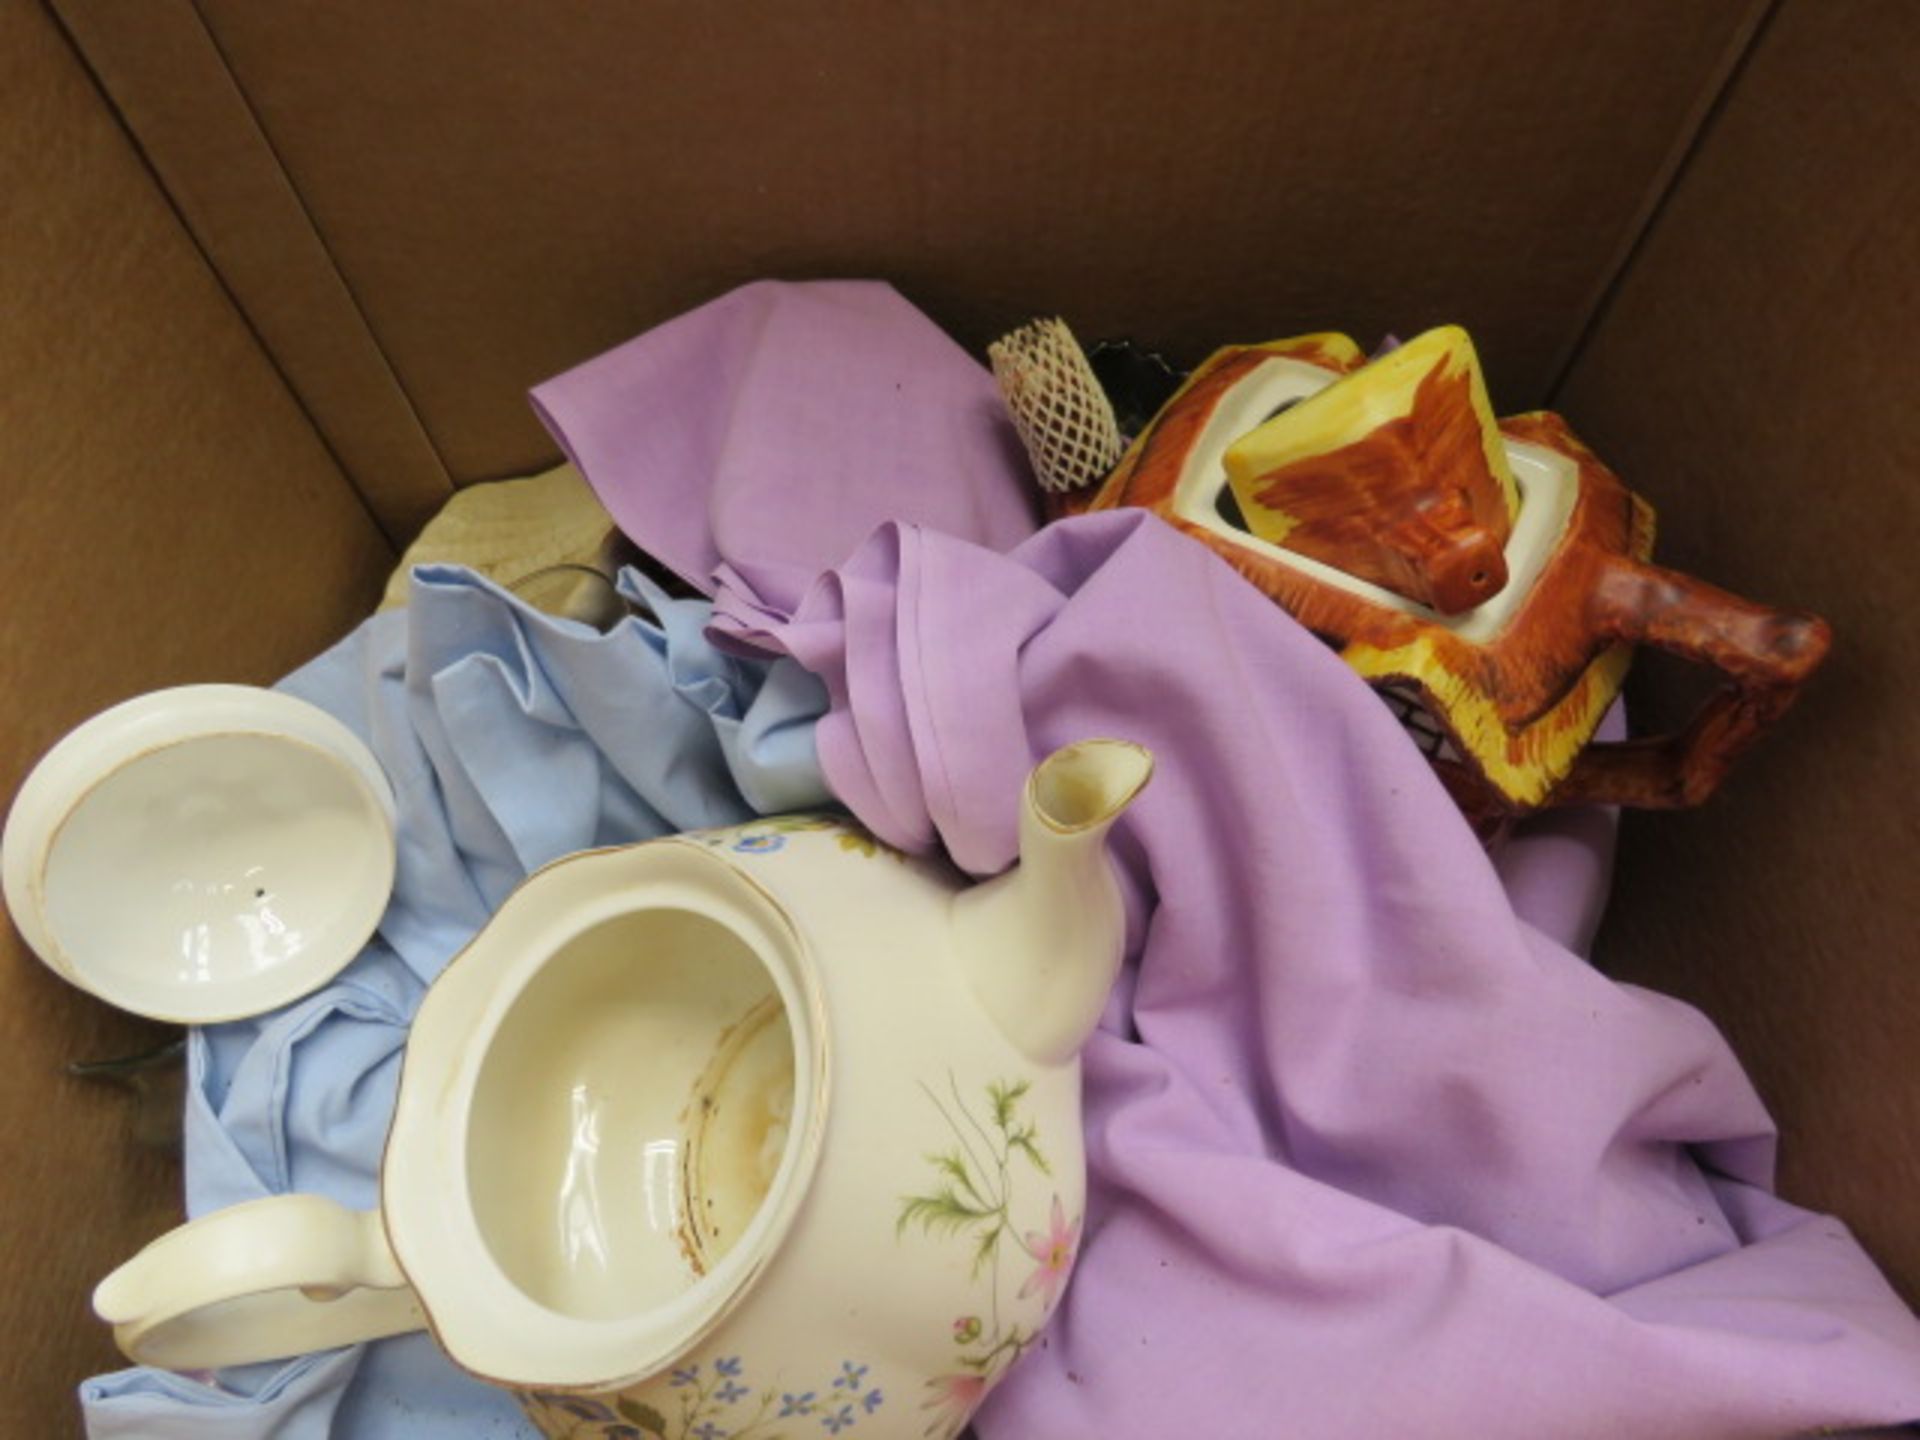 3 boxes and bag containing mini wicker baskets, quartz clock, ornamental ship, and crockery - Image 2 of 3